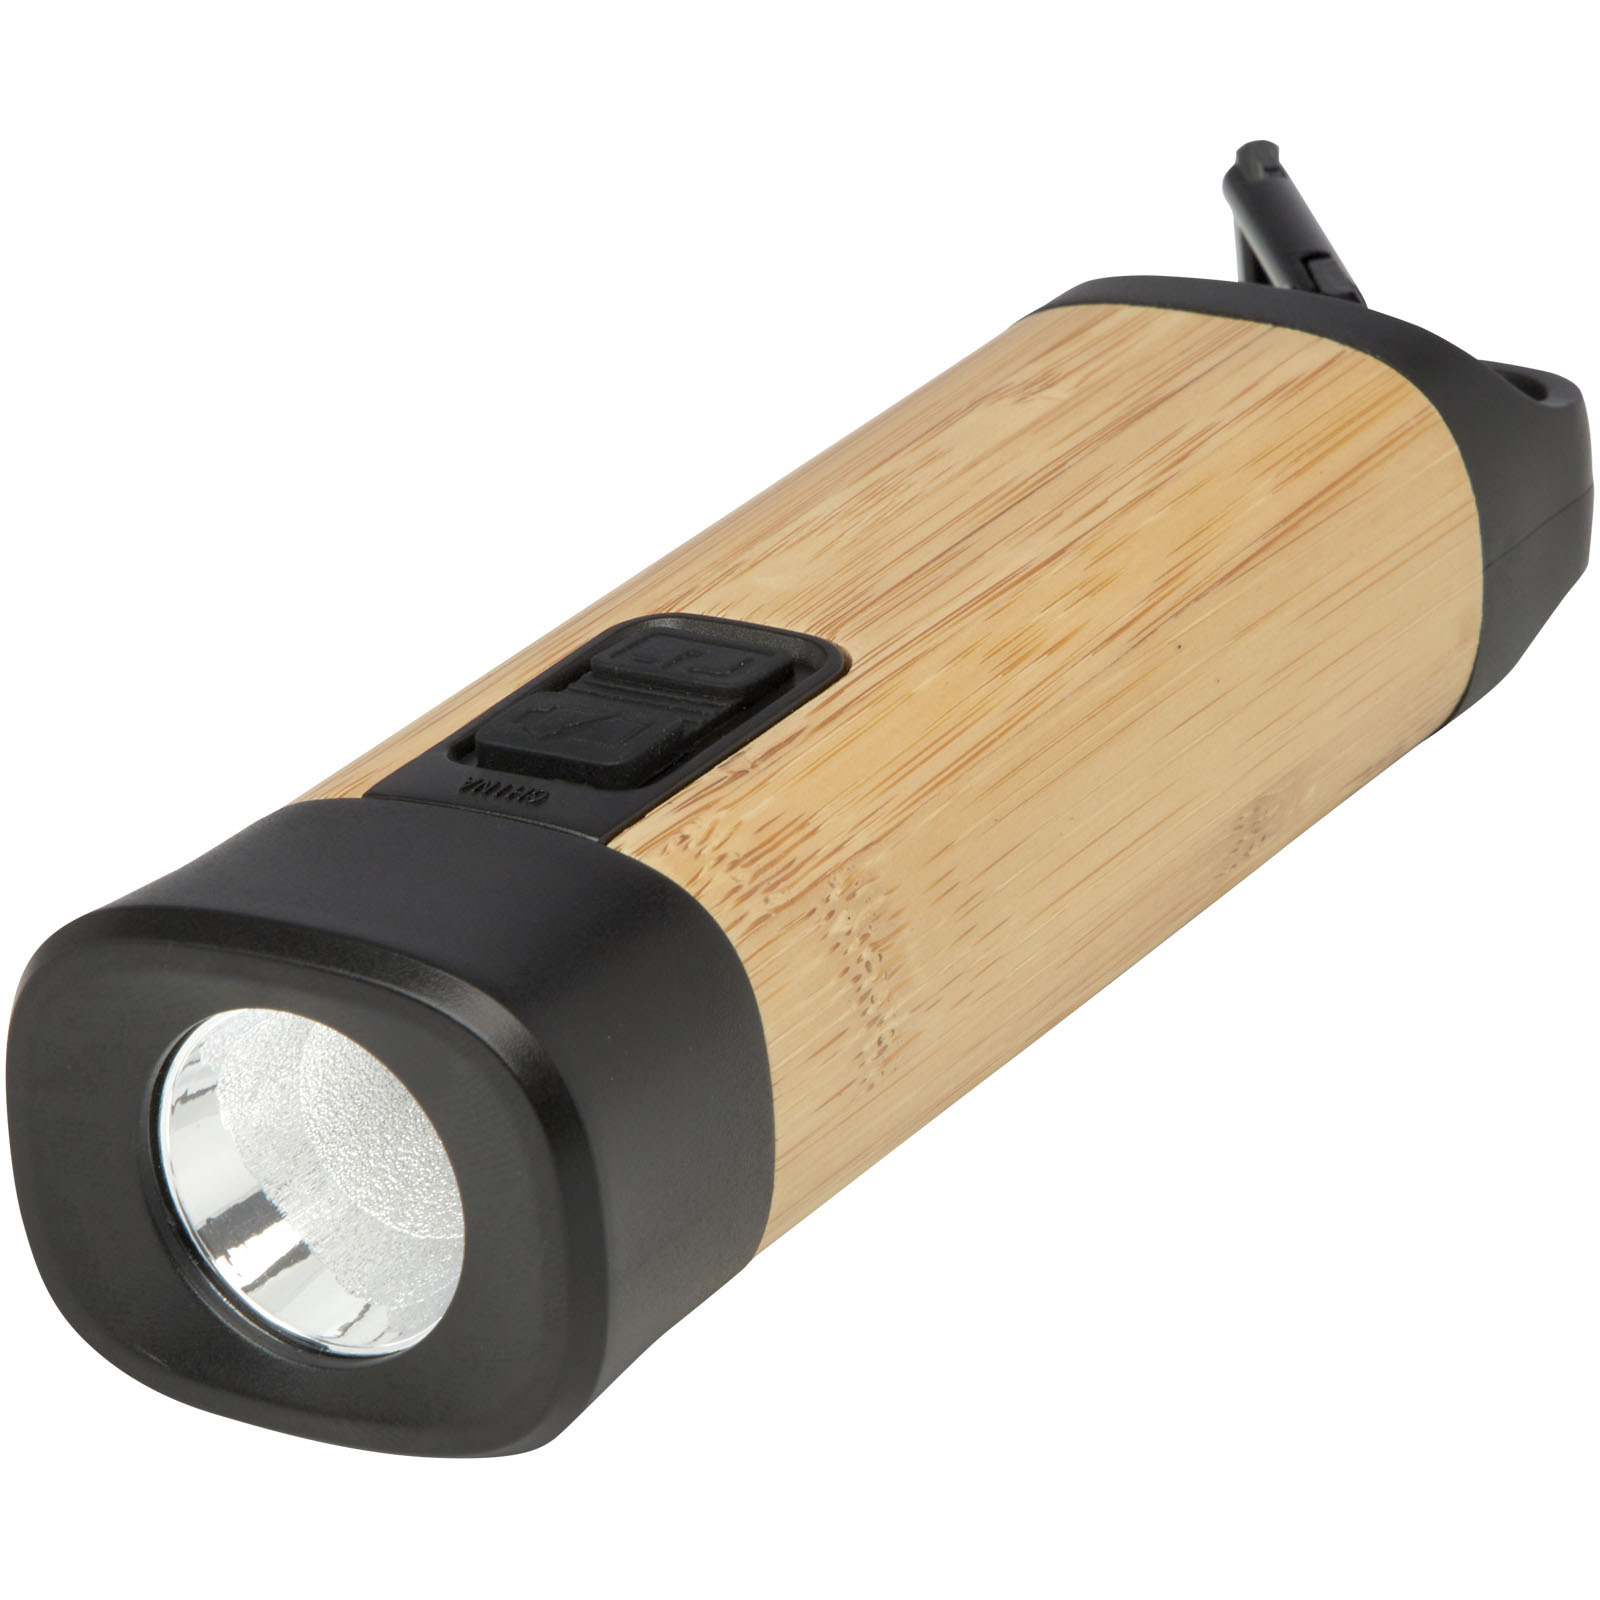 Lamps - Kuma bamboo/RCS recycled plastic torch with carabiner